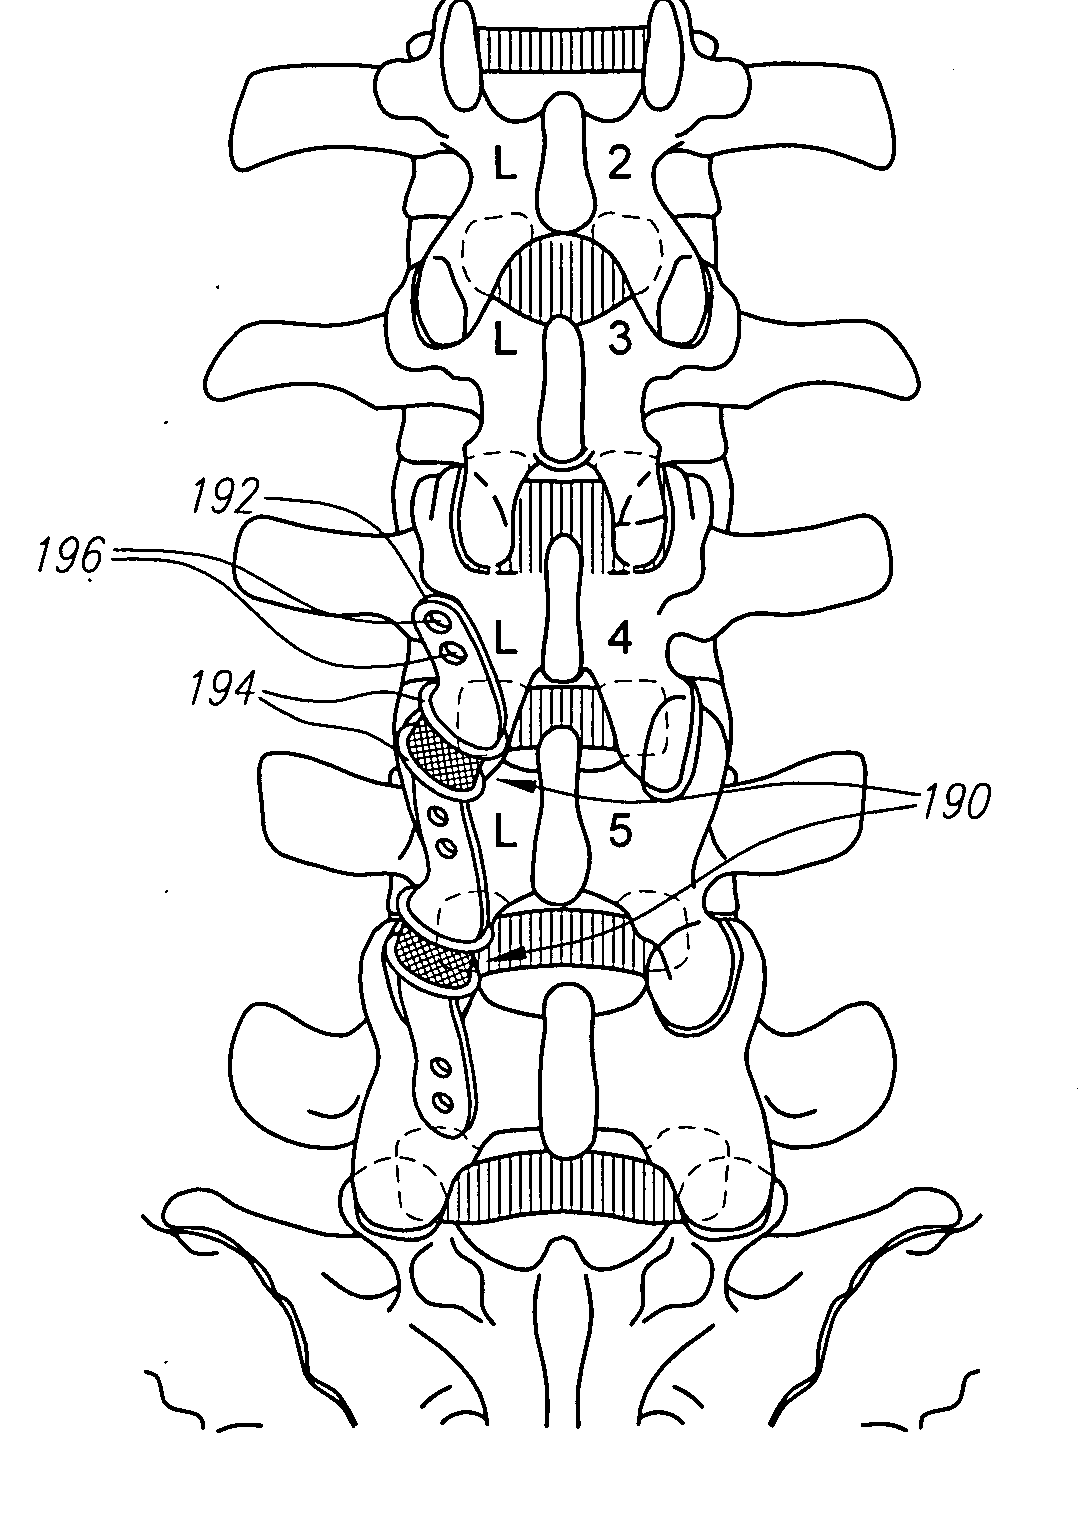 Spinal stabilization systems and methods